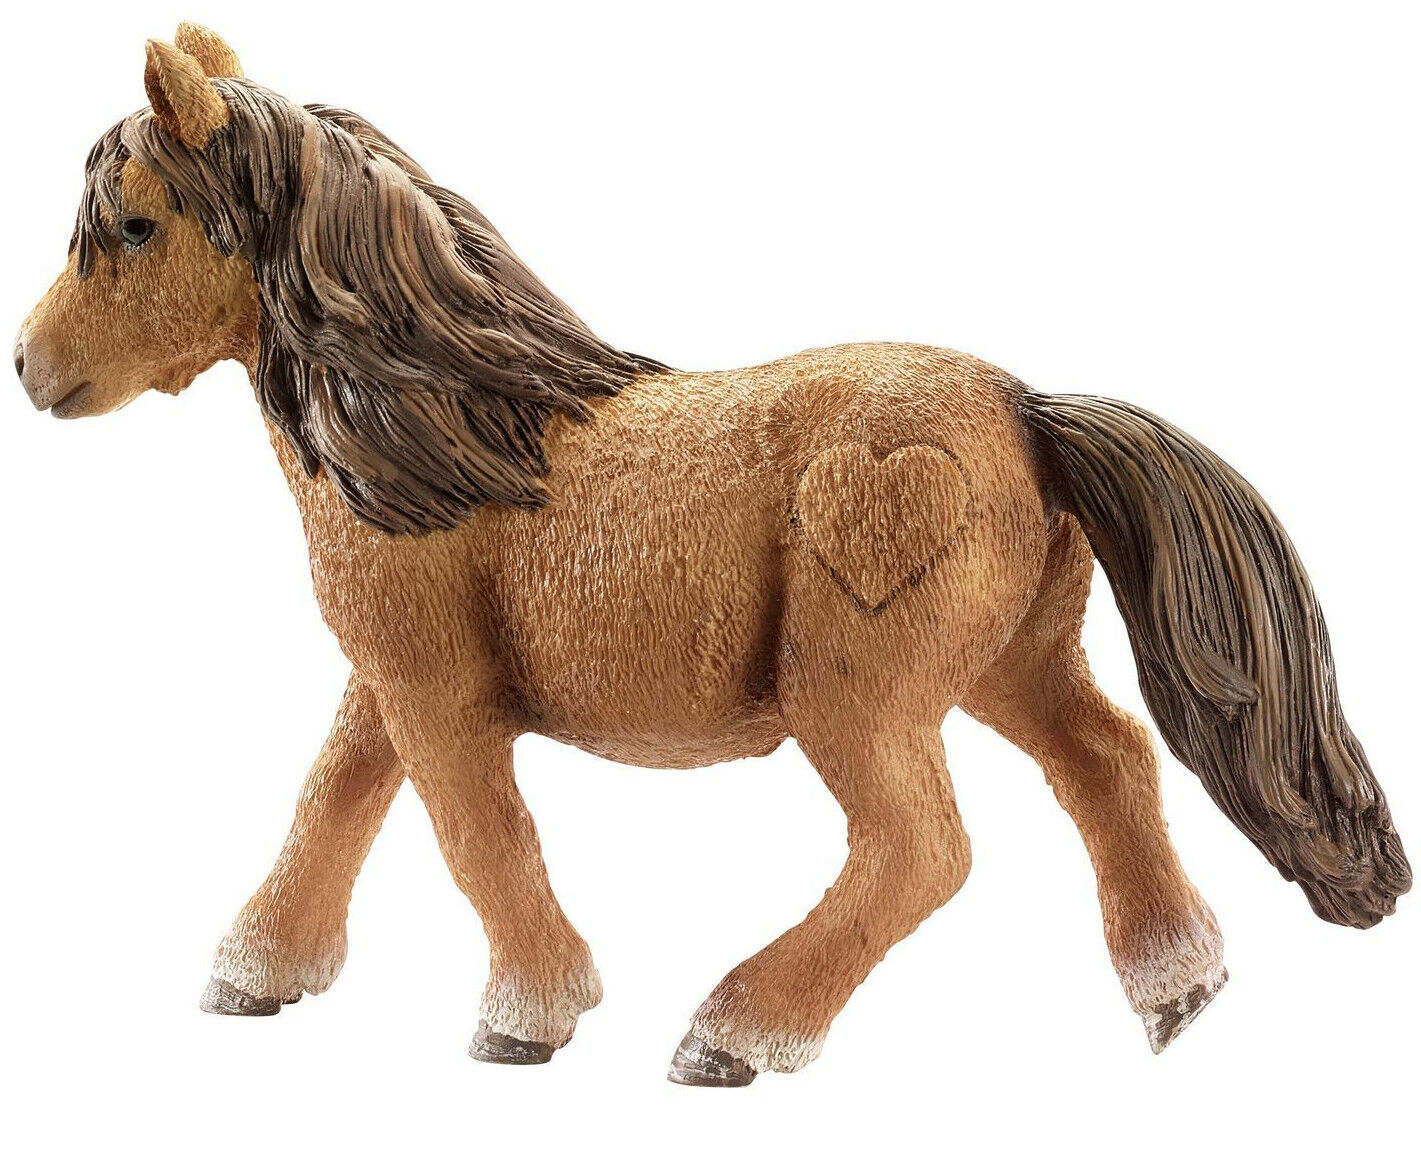 NEW SEALED Schleich SHETLAND PONY MARE with Heart Horse Figure 13750 RETIRED HTF